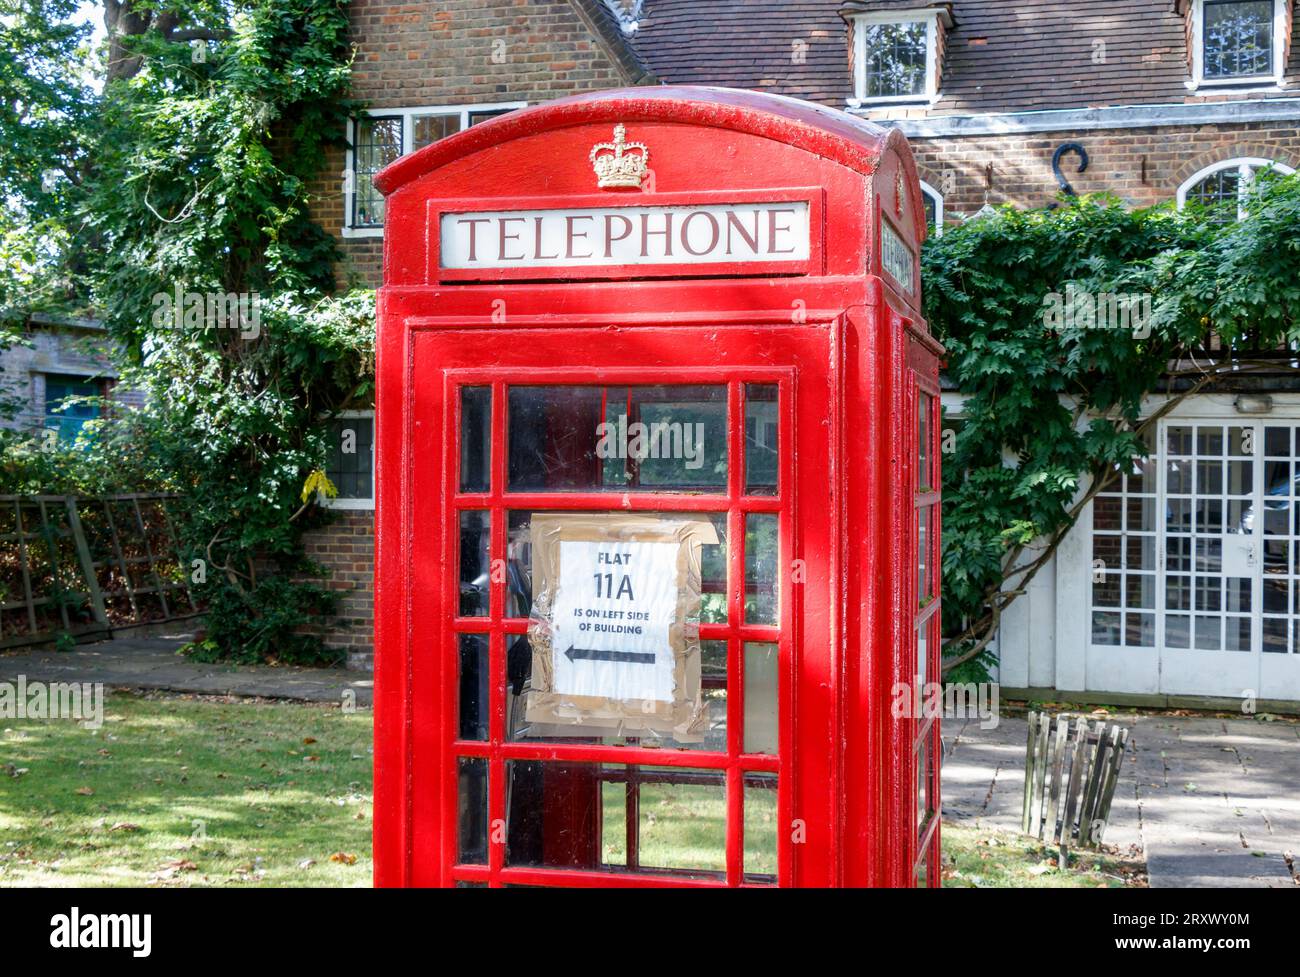 A red traditional K6 British telephone box in Hampstead Garden Suburb, London, UK Stock Photo